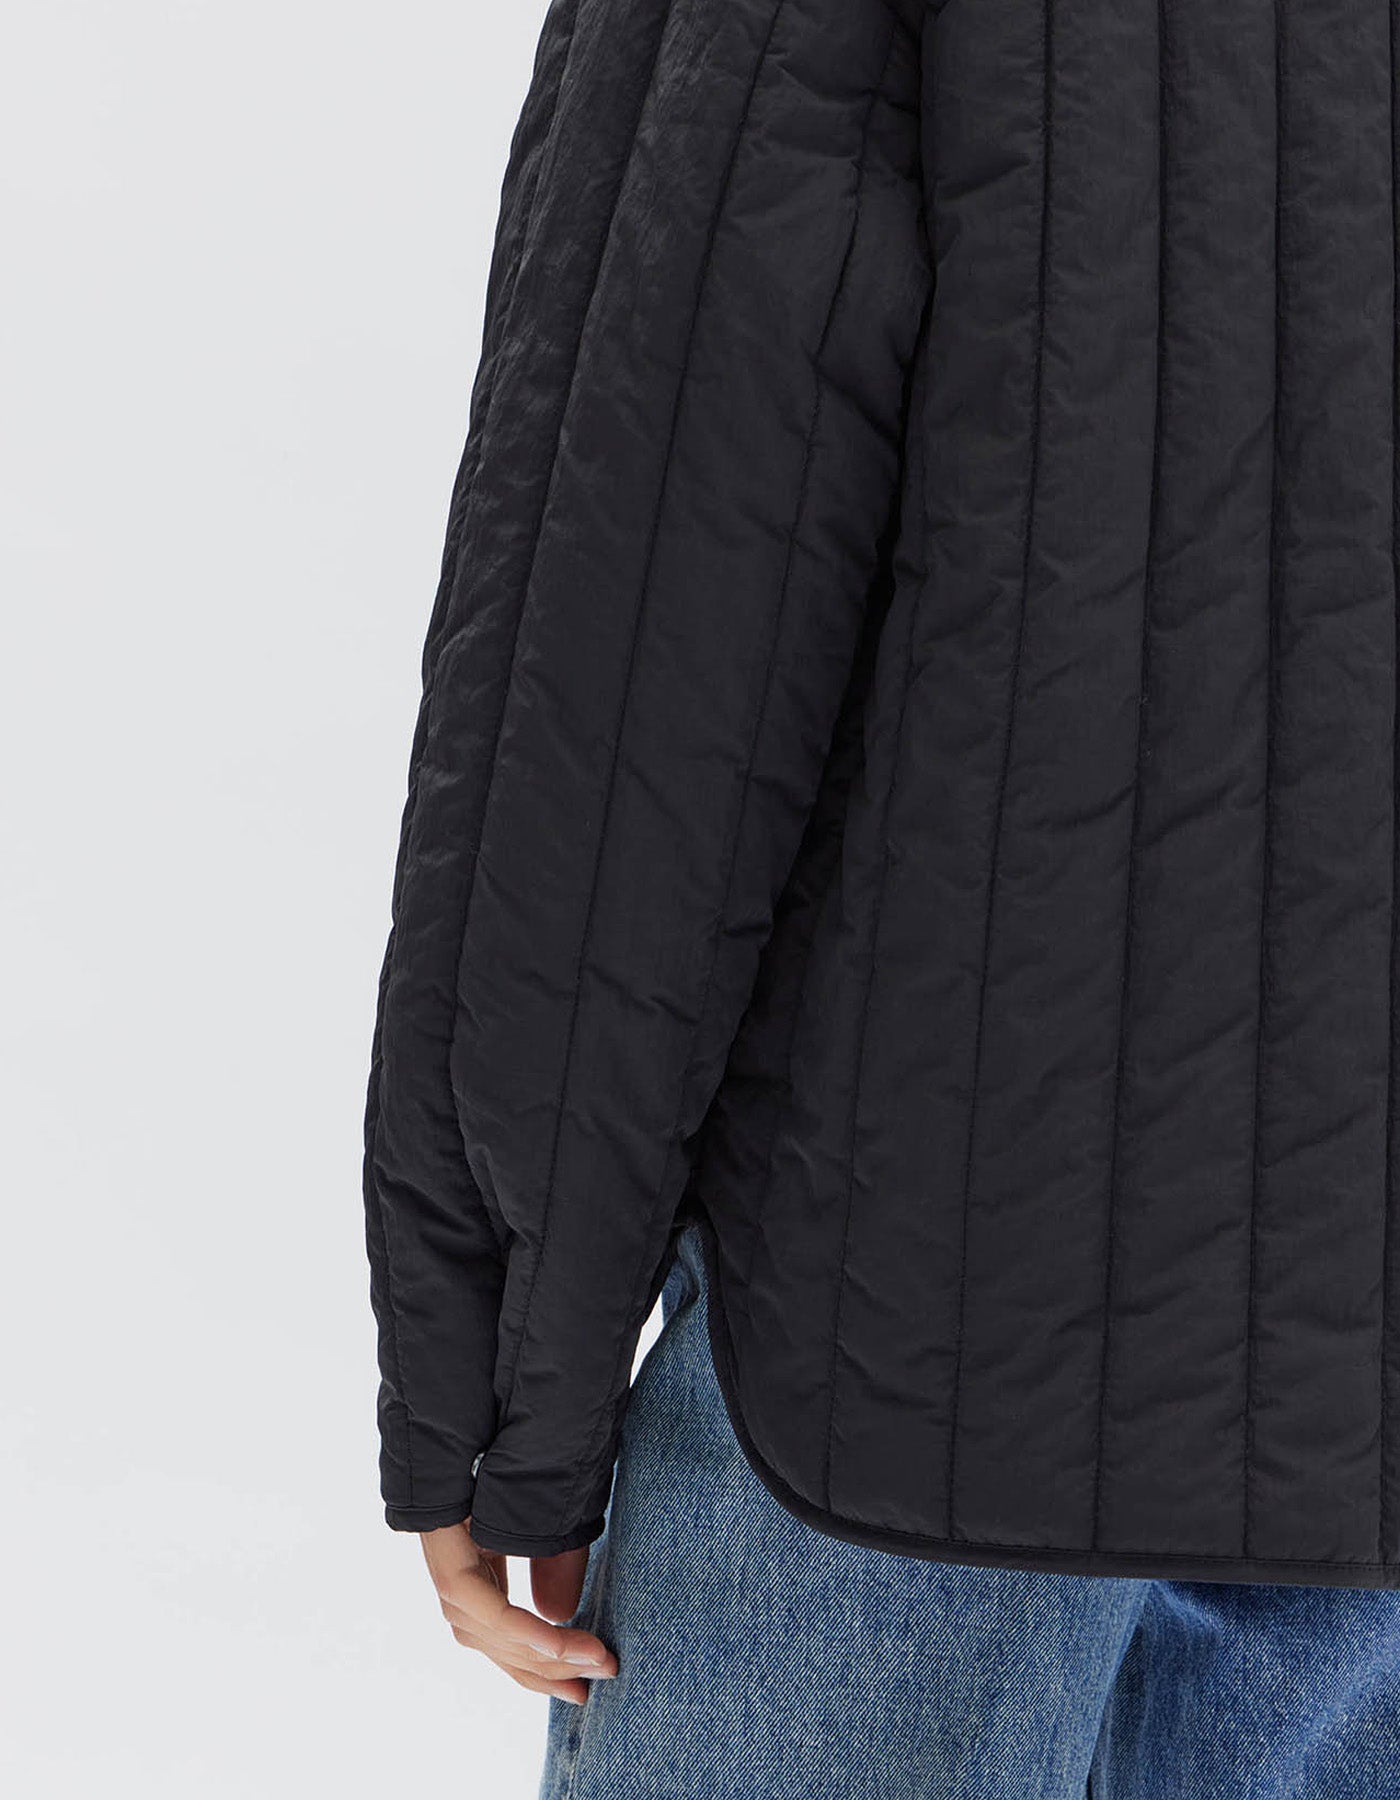 Assembly Label Marlowe Quilted Jacket Black